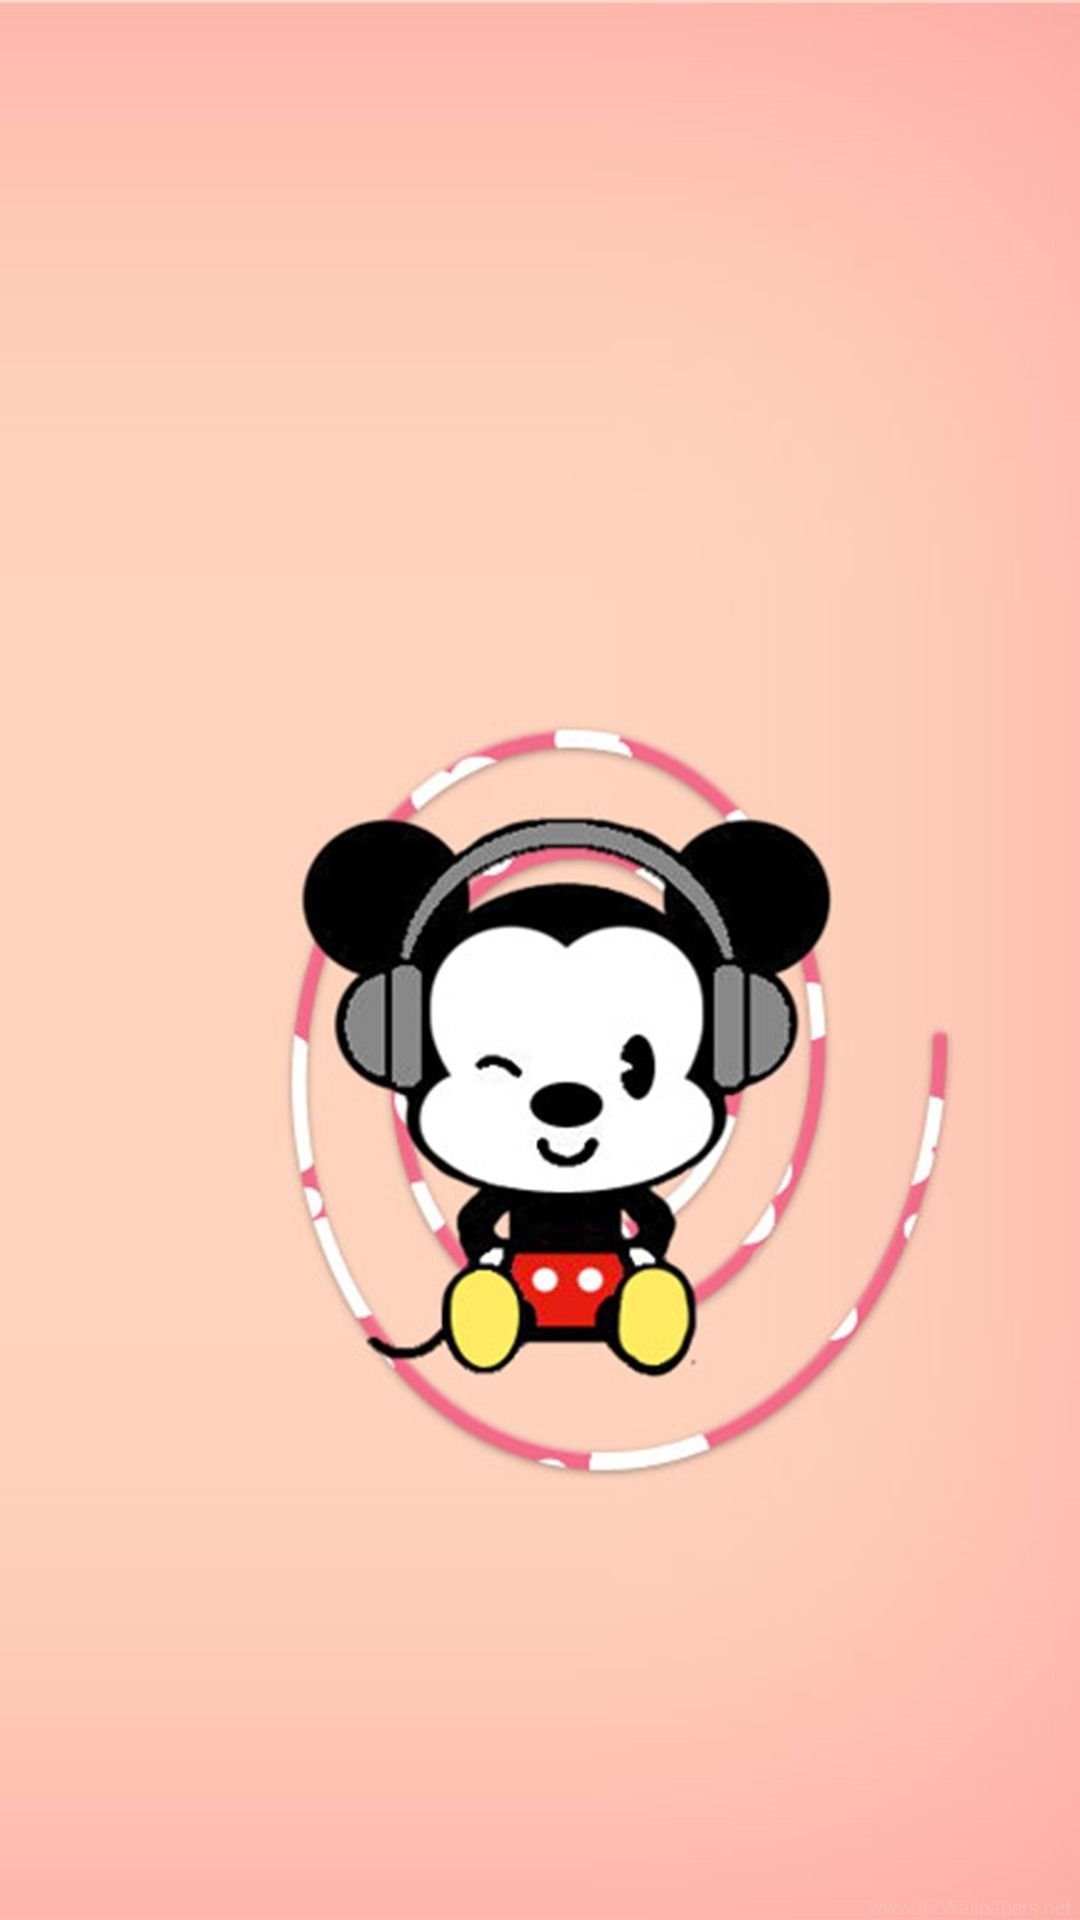 1080x1920 Mickey Mouse Iphone 4 Wallpaper Wallpapers 5